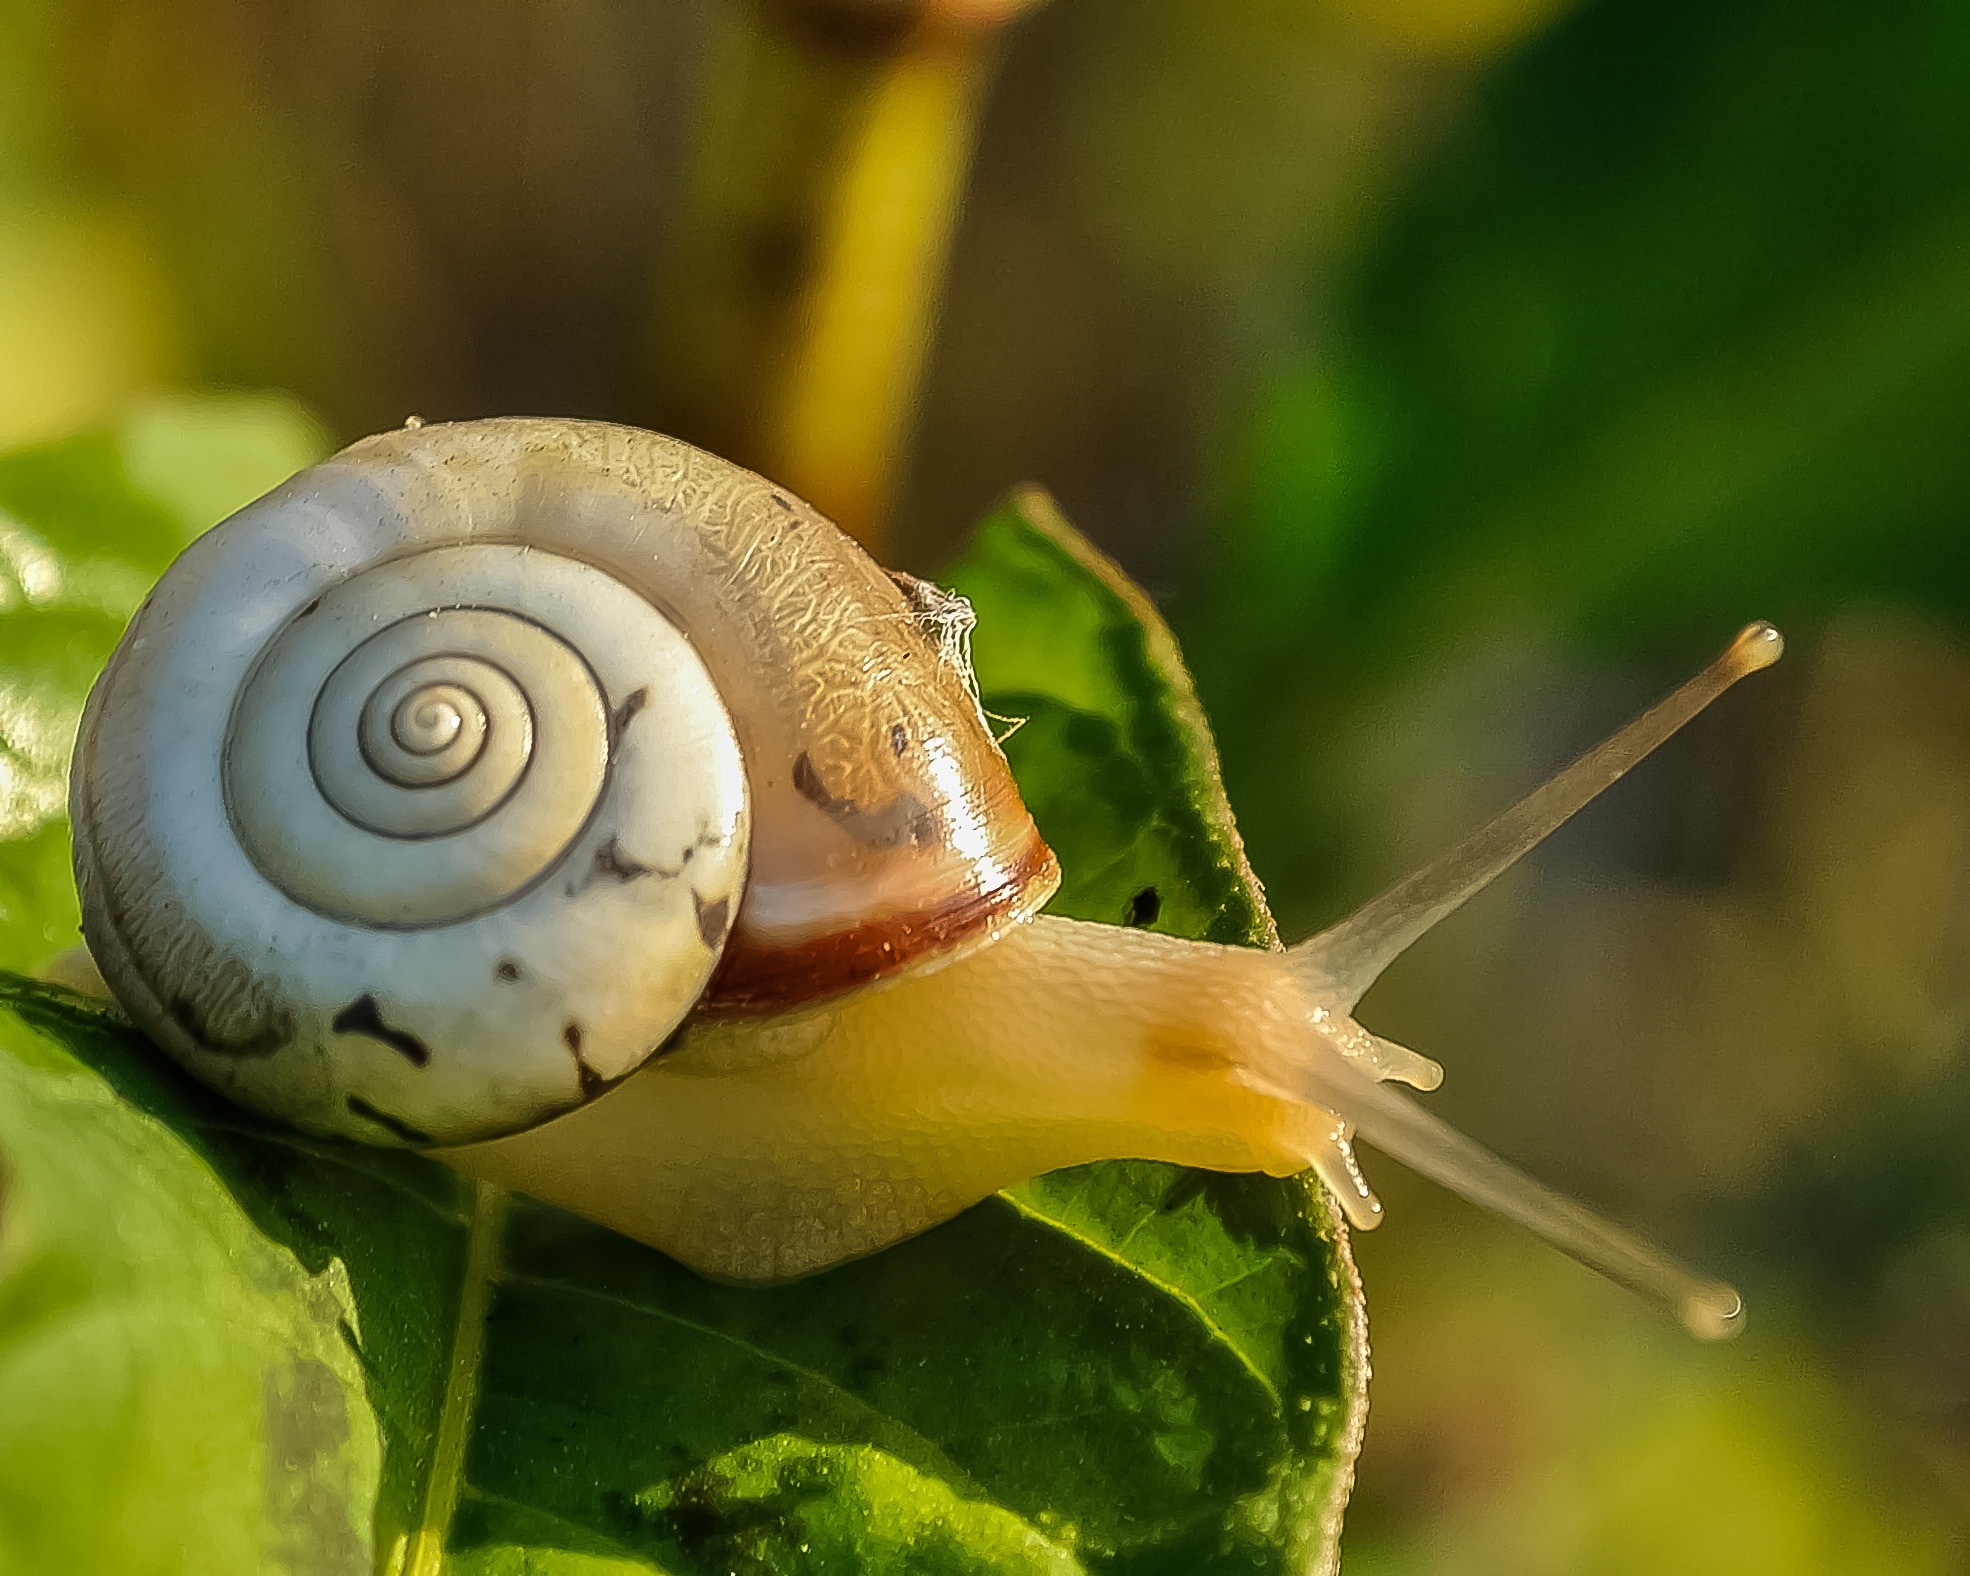 brown and white snail